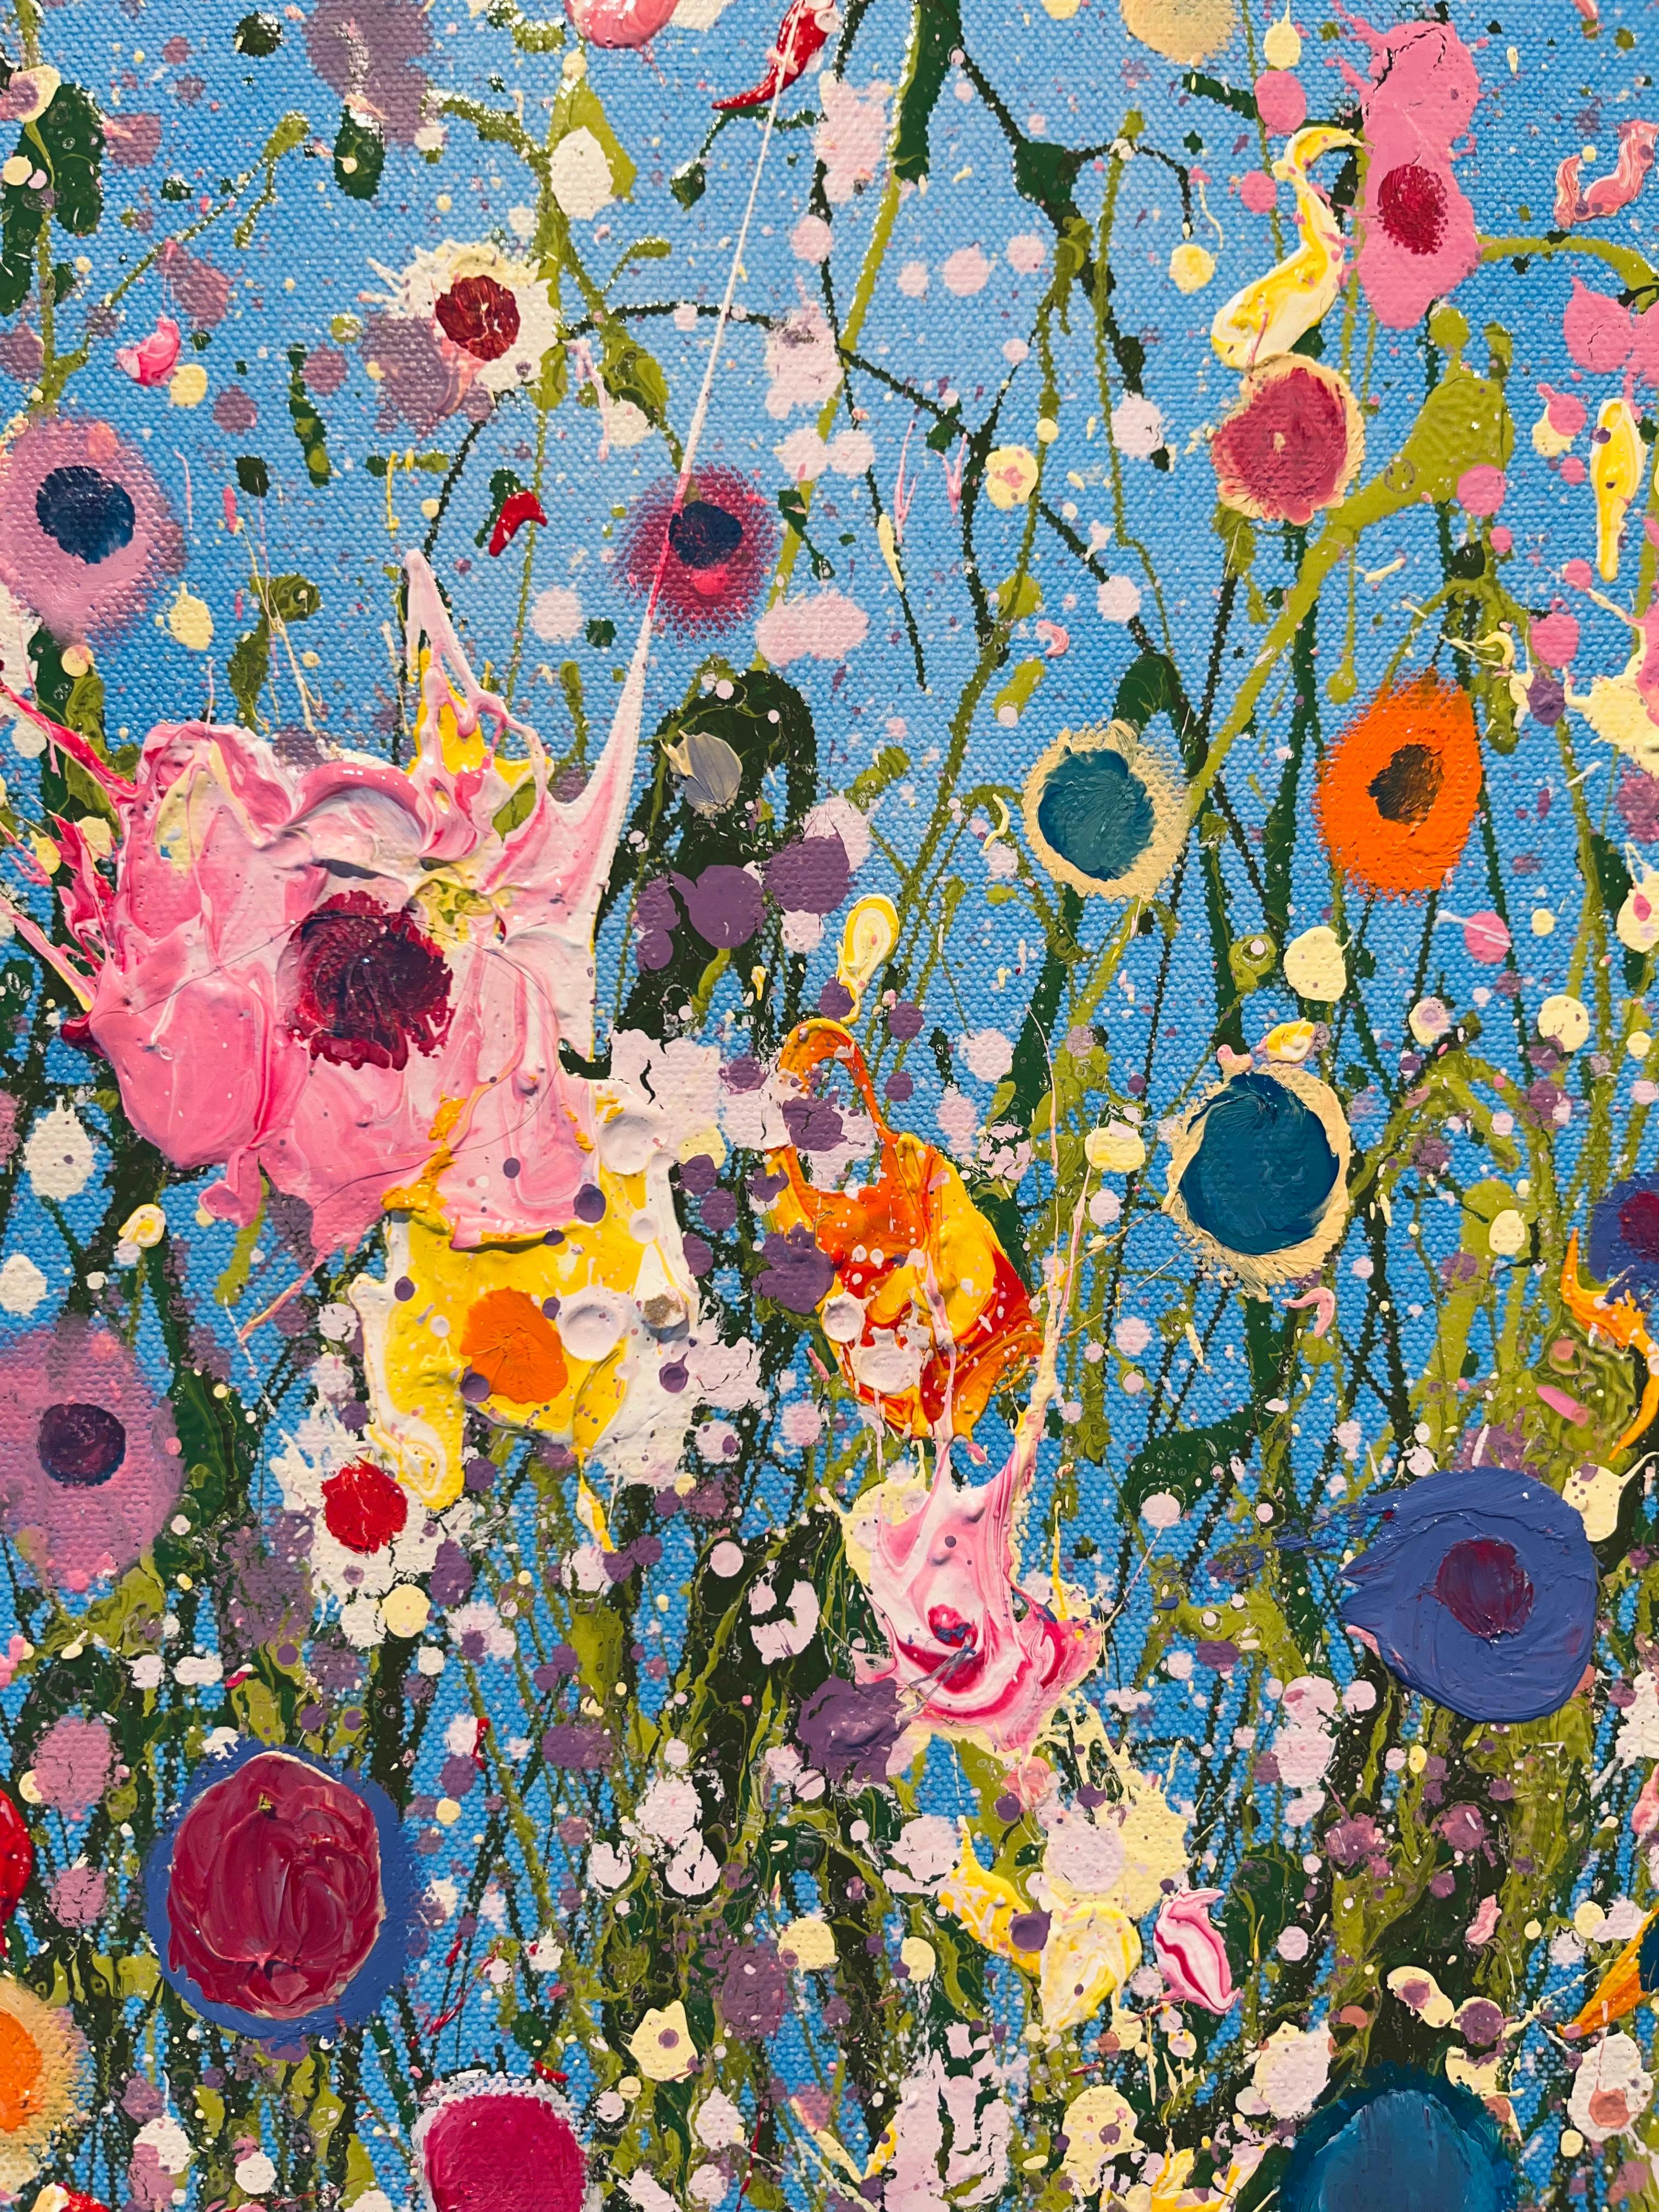 Summer Skies and Butterflies- original abstract floral oil painting- modern art - Blue Abstract Painting by Yvonne Coomber